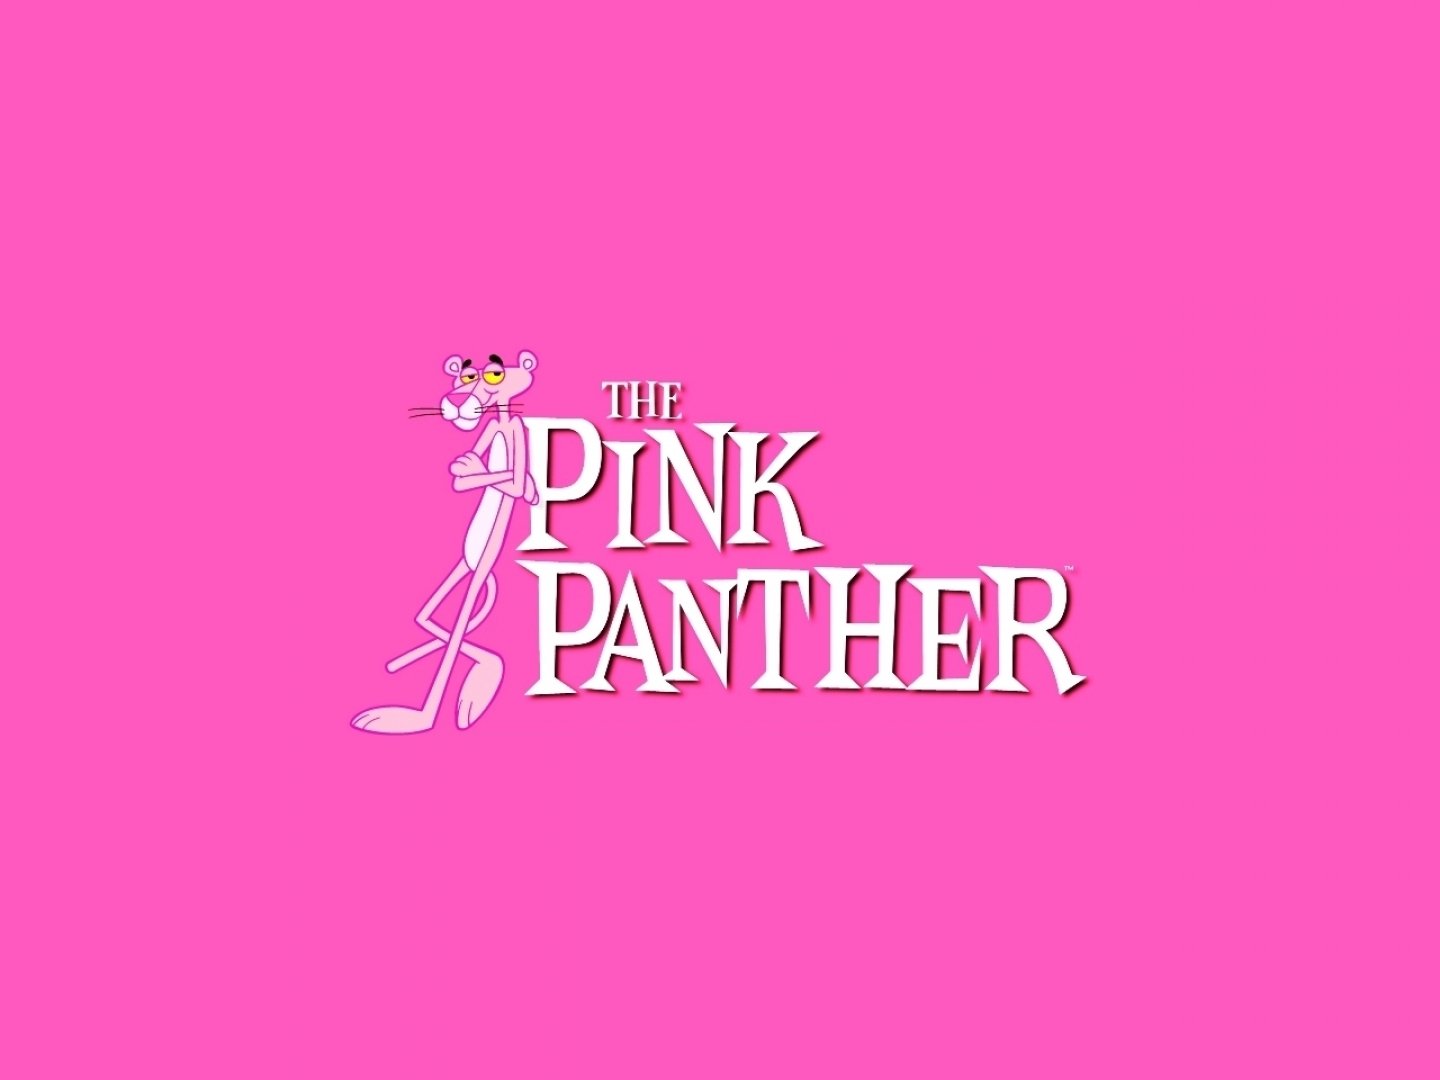 The Pink Panther Show Wallpaper And Background Image 1440x1080